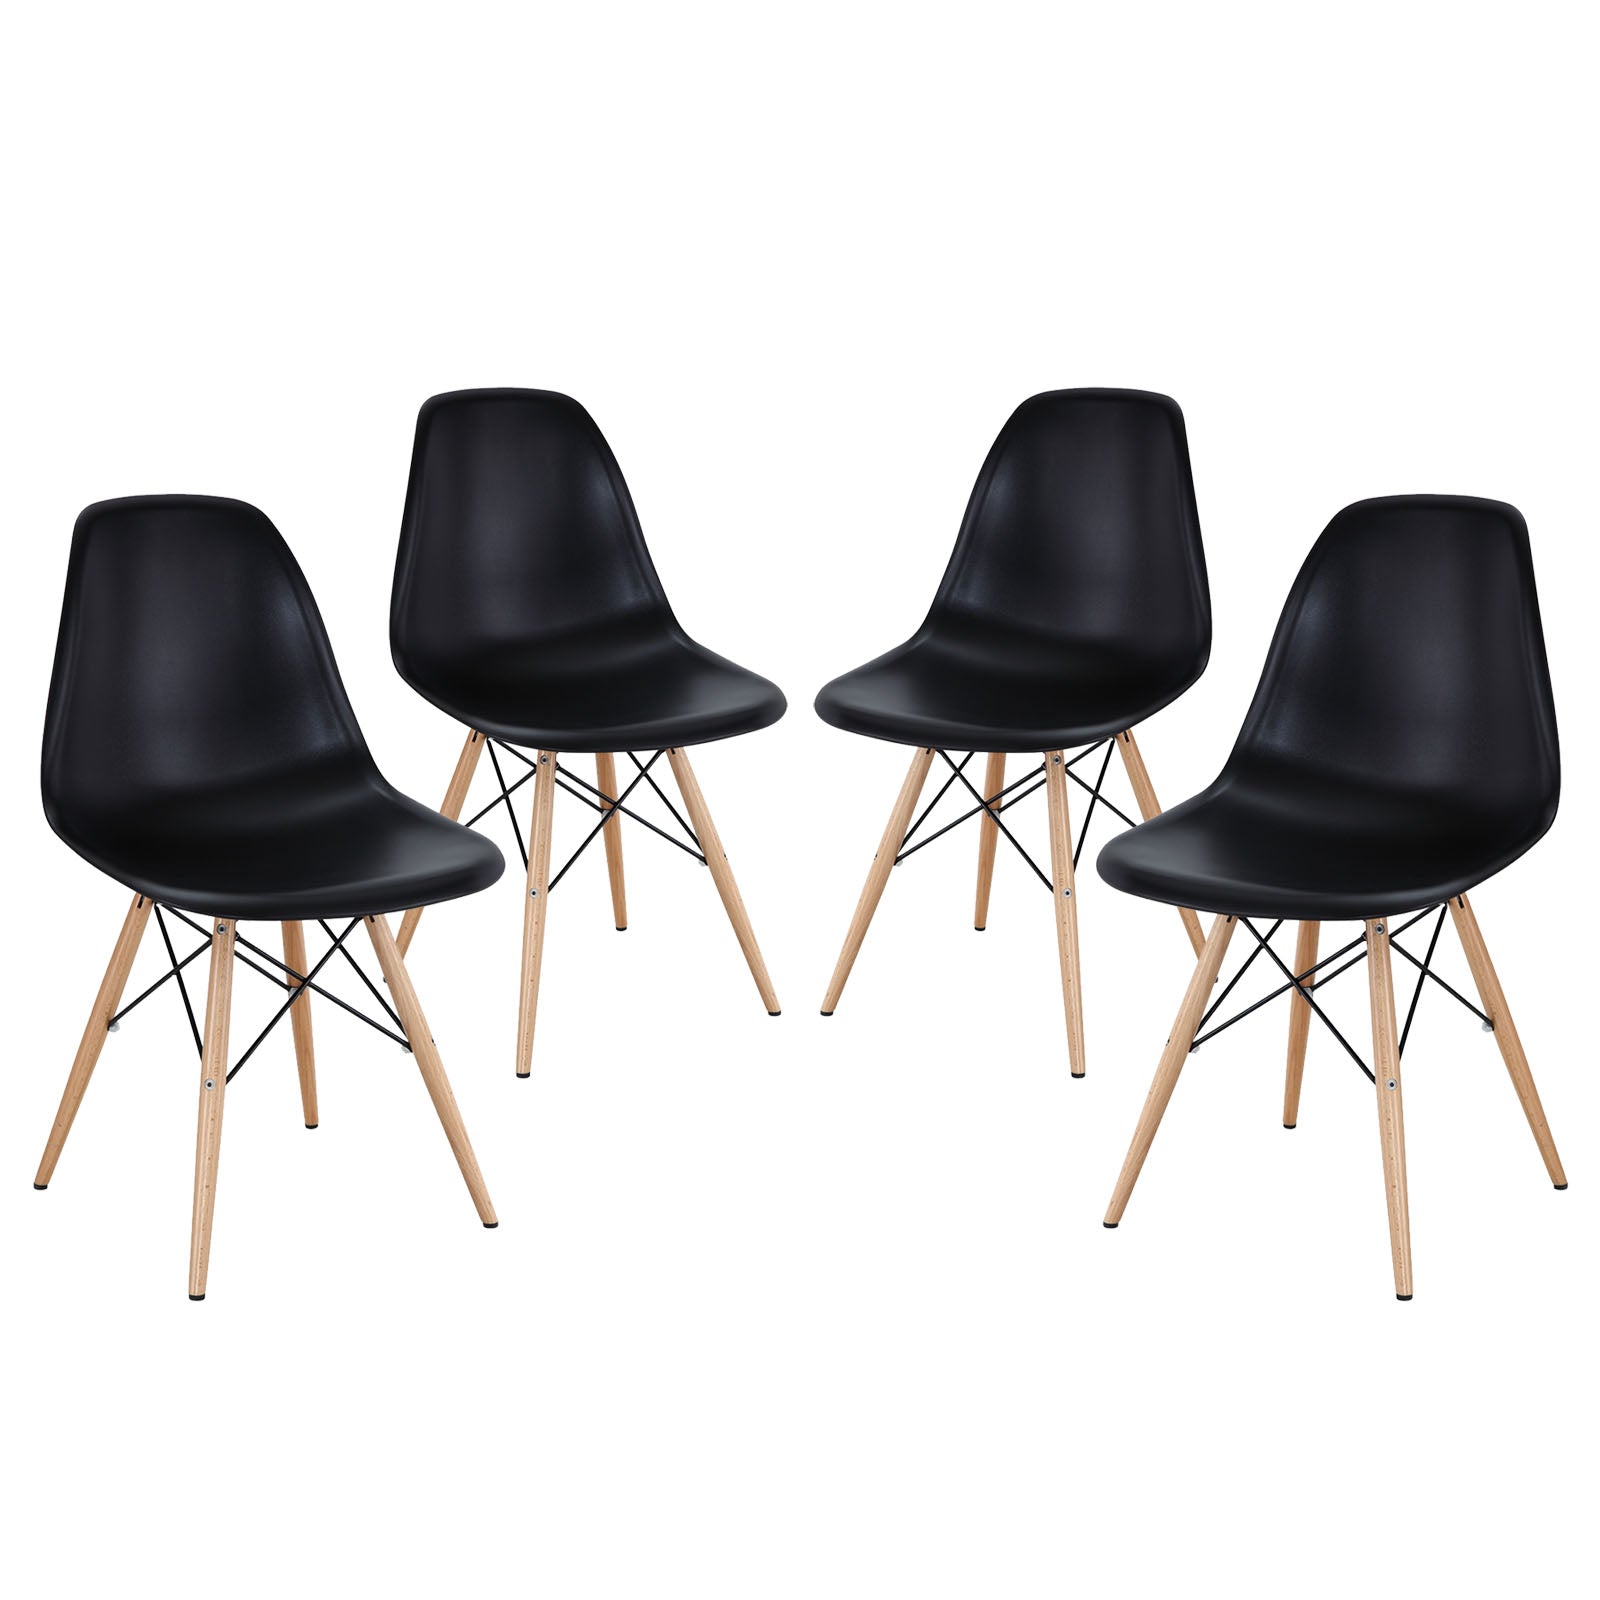 Pyramid Dining Side Chairs Set of 4 - East Shore Modern Home Furnishings